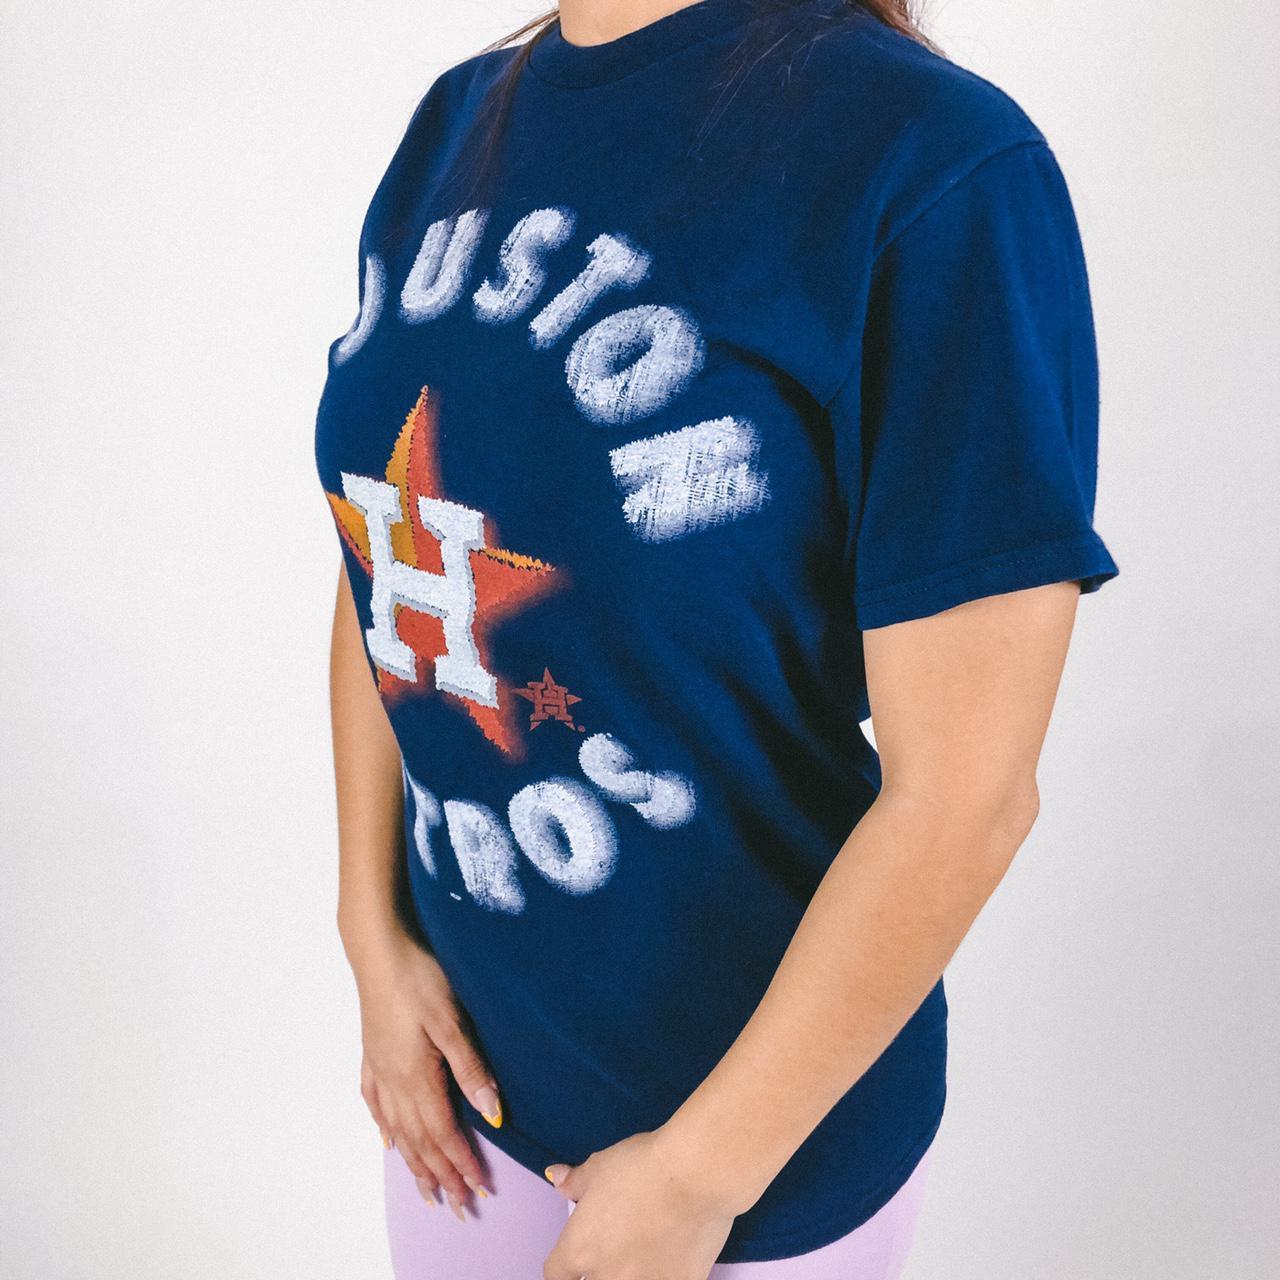 Product Image 2 - Houston Astros Tee Size S
/
8/10
/
This